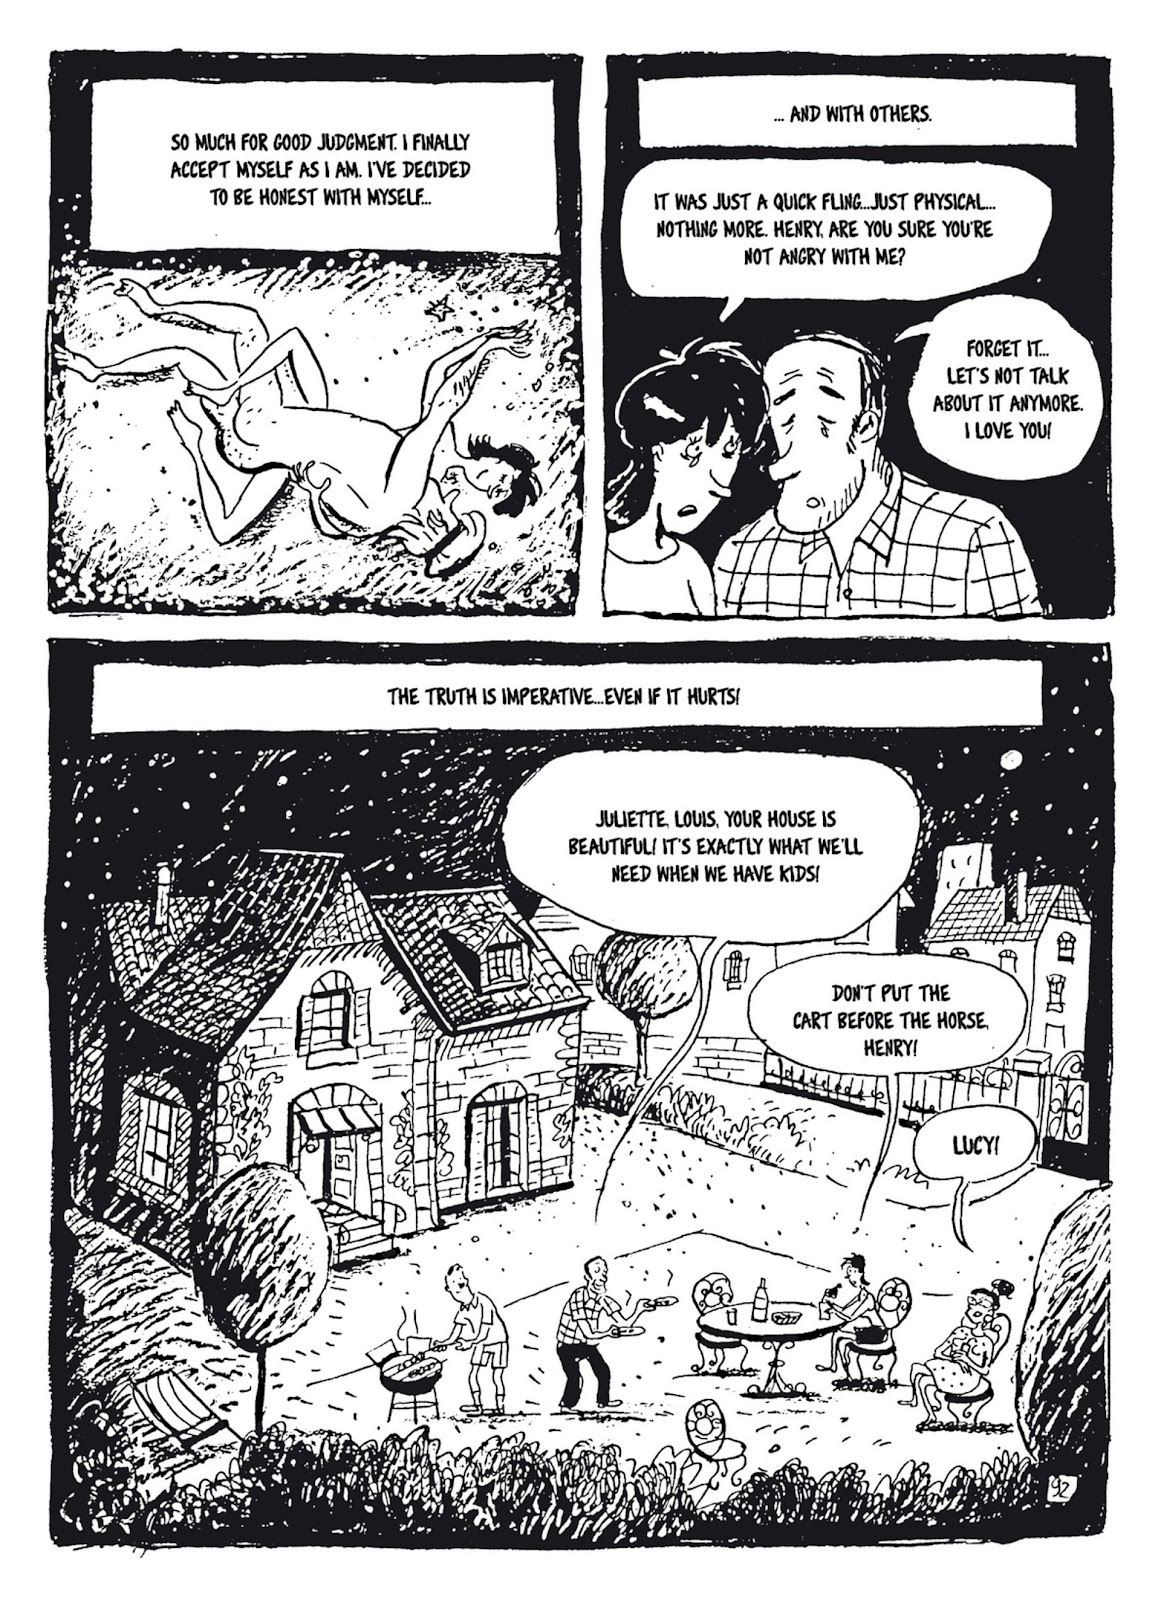 Bluesy Lucy - The Existential Chronicles of a Thirtysomething issue 2 - Page 45